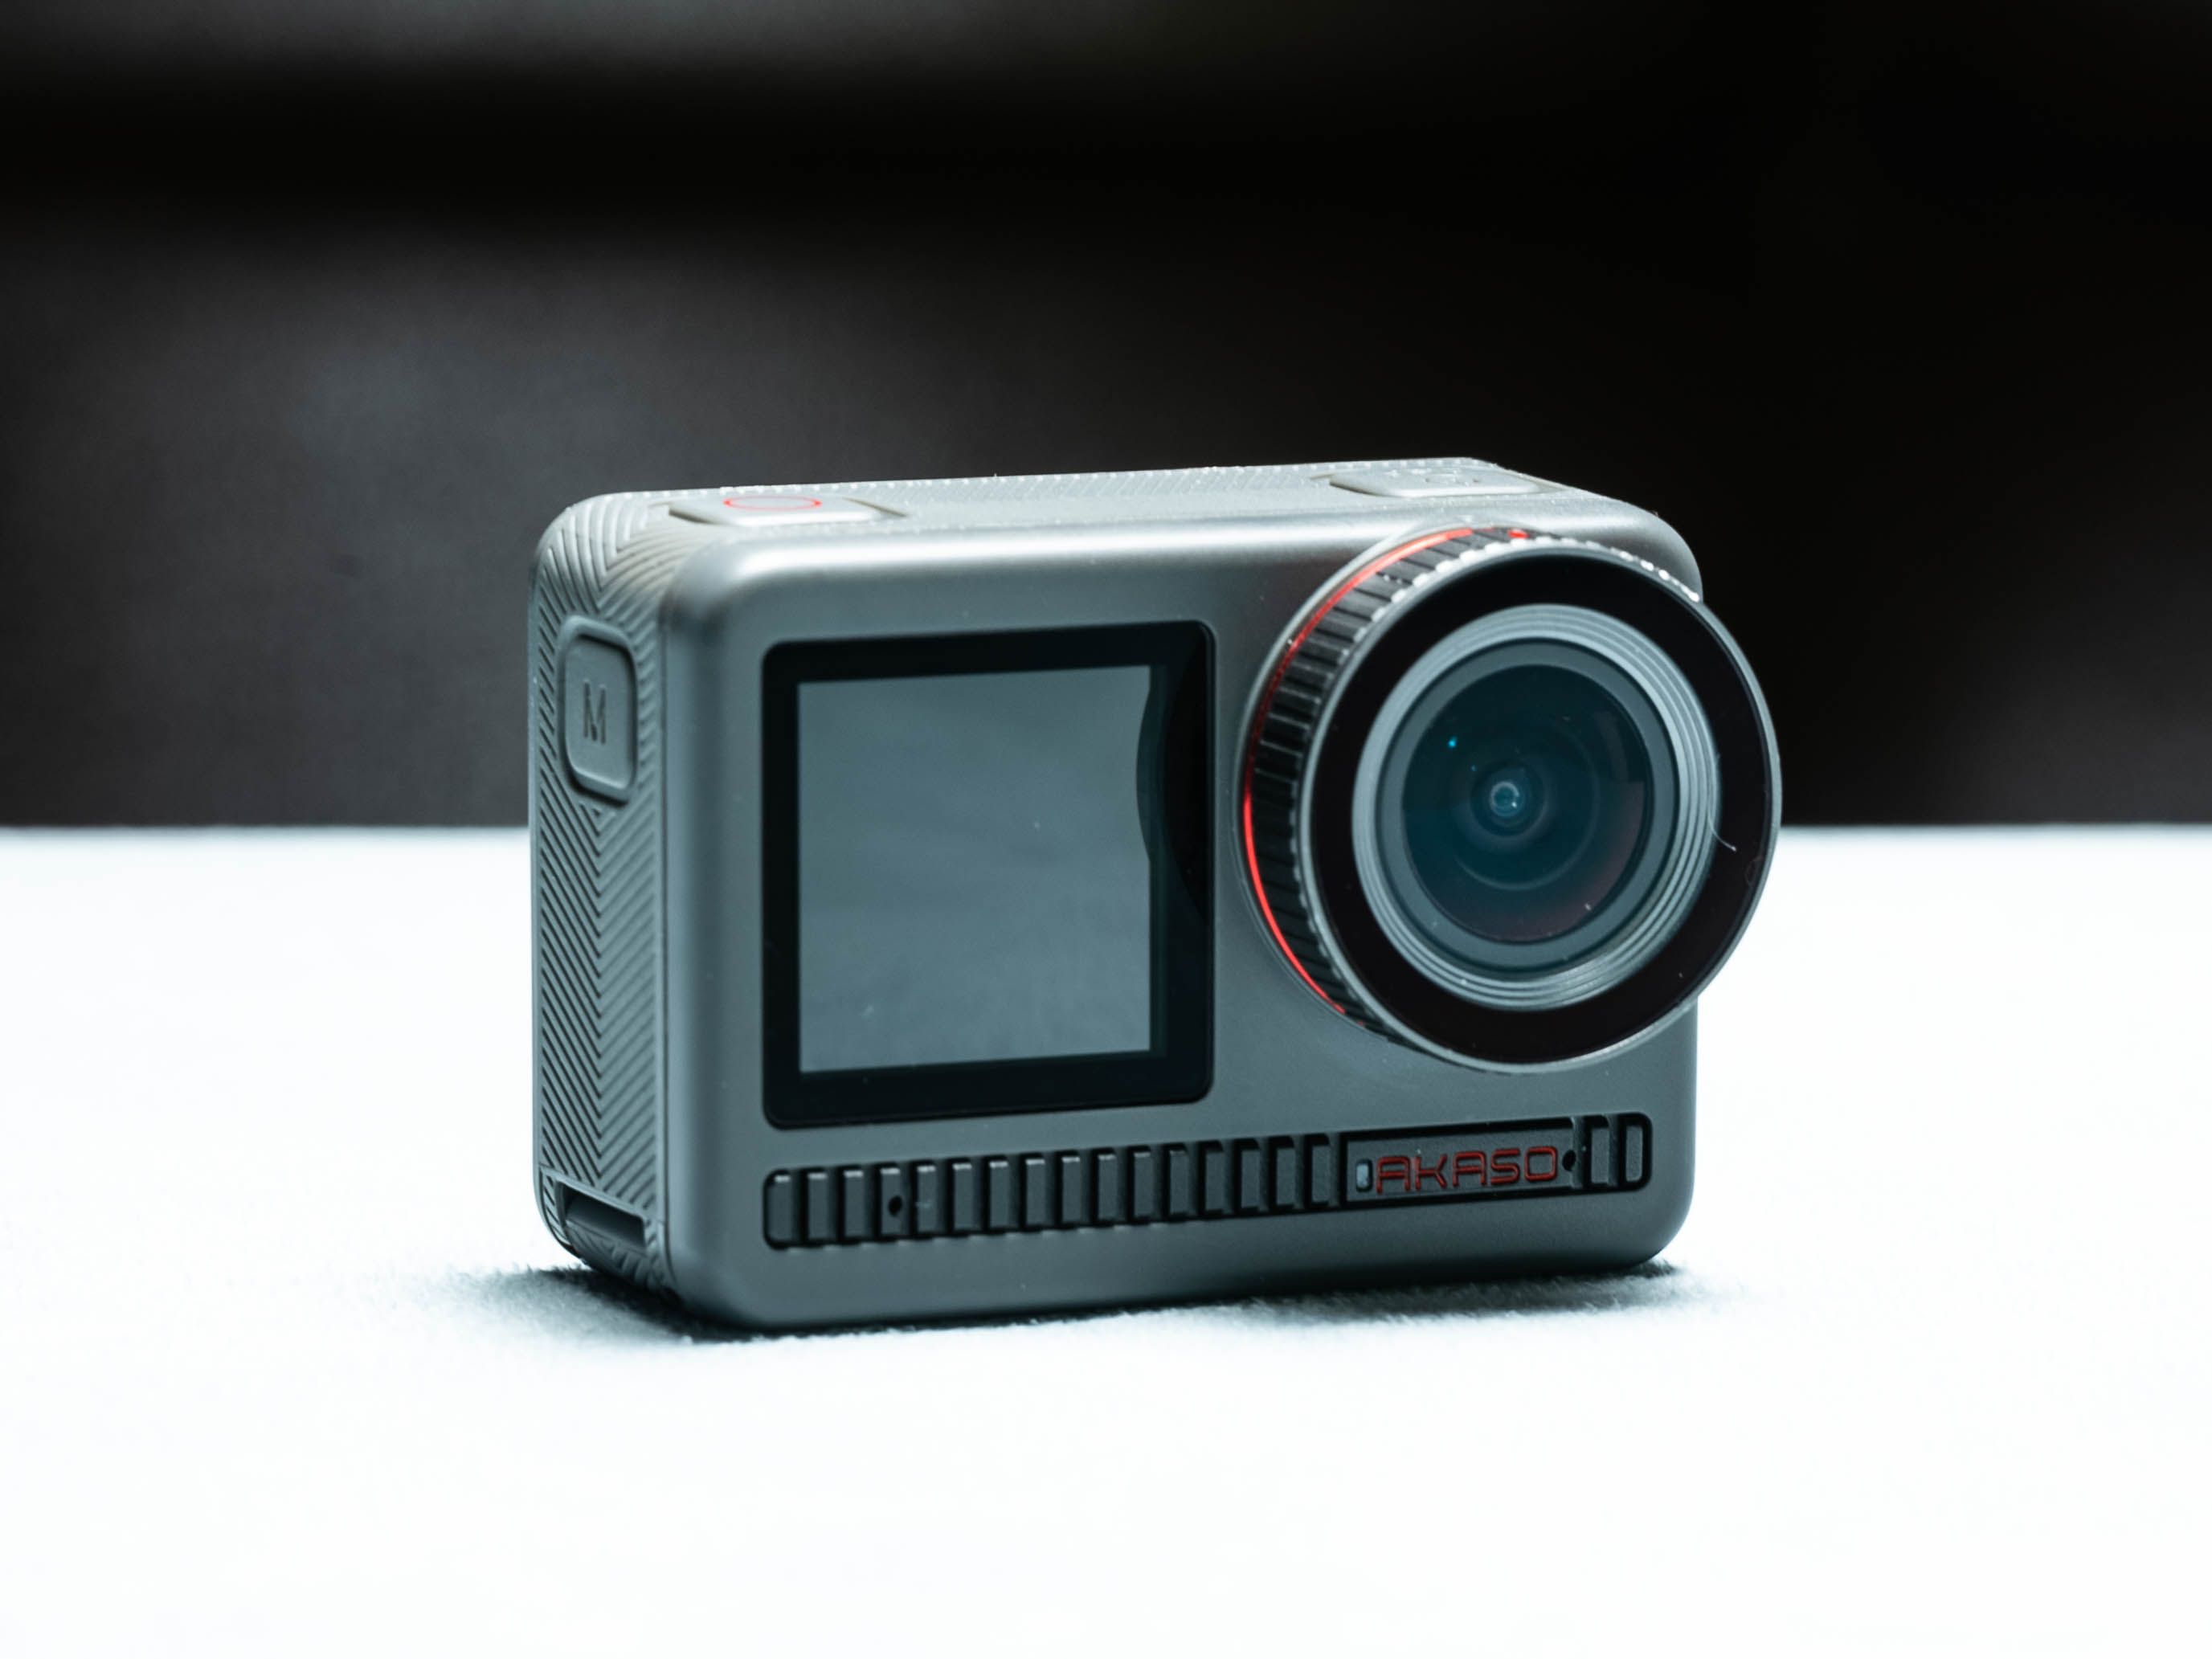 AKASO Brave 8 is an Expensive Action Camera With Unforgivably